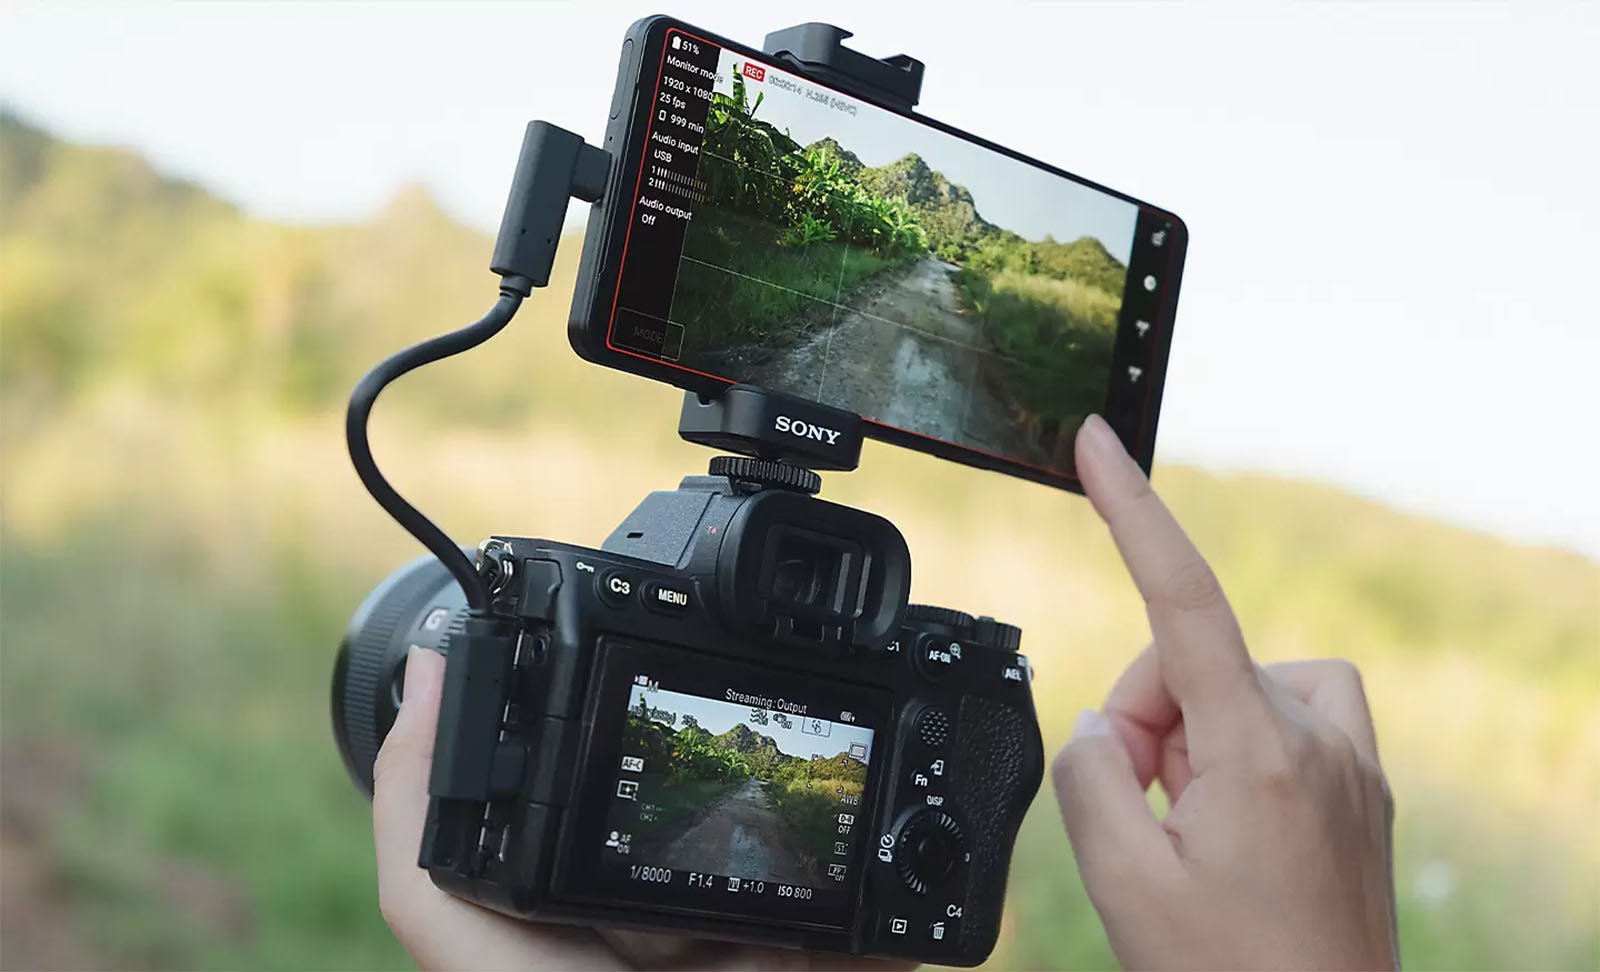 A close-up of a person using a professional camera with an attached monitor displaying the same image as the camera's screen. The monitor shows a scenic outdoor path surrounded by greenery. The camera is branded "Sony," and the person's hand is touching the monitor's screen.